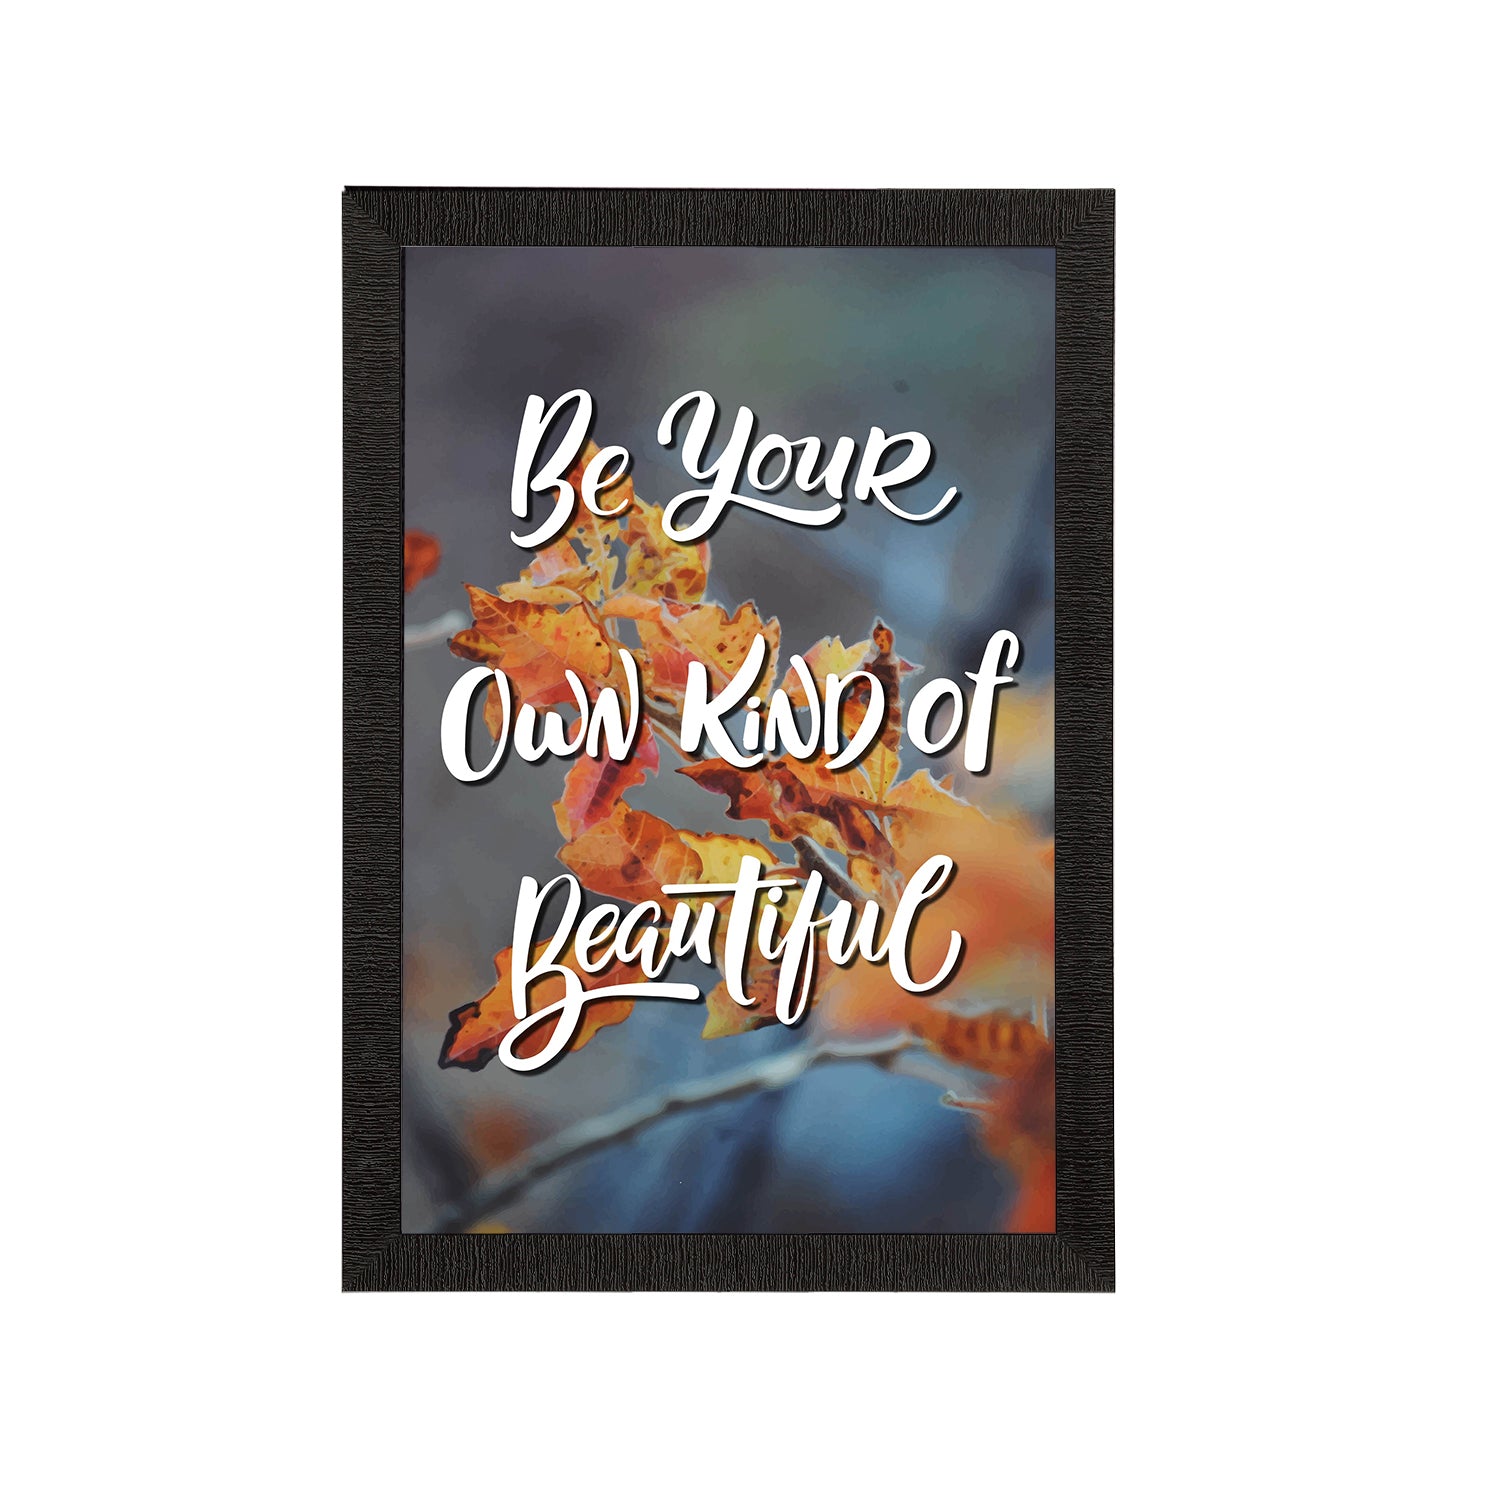 "Be Your Own Kind Of Beautiful" Motivational Quote Satin Matt Texture UV Art Painting